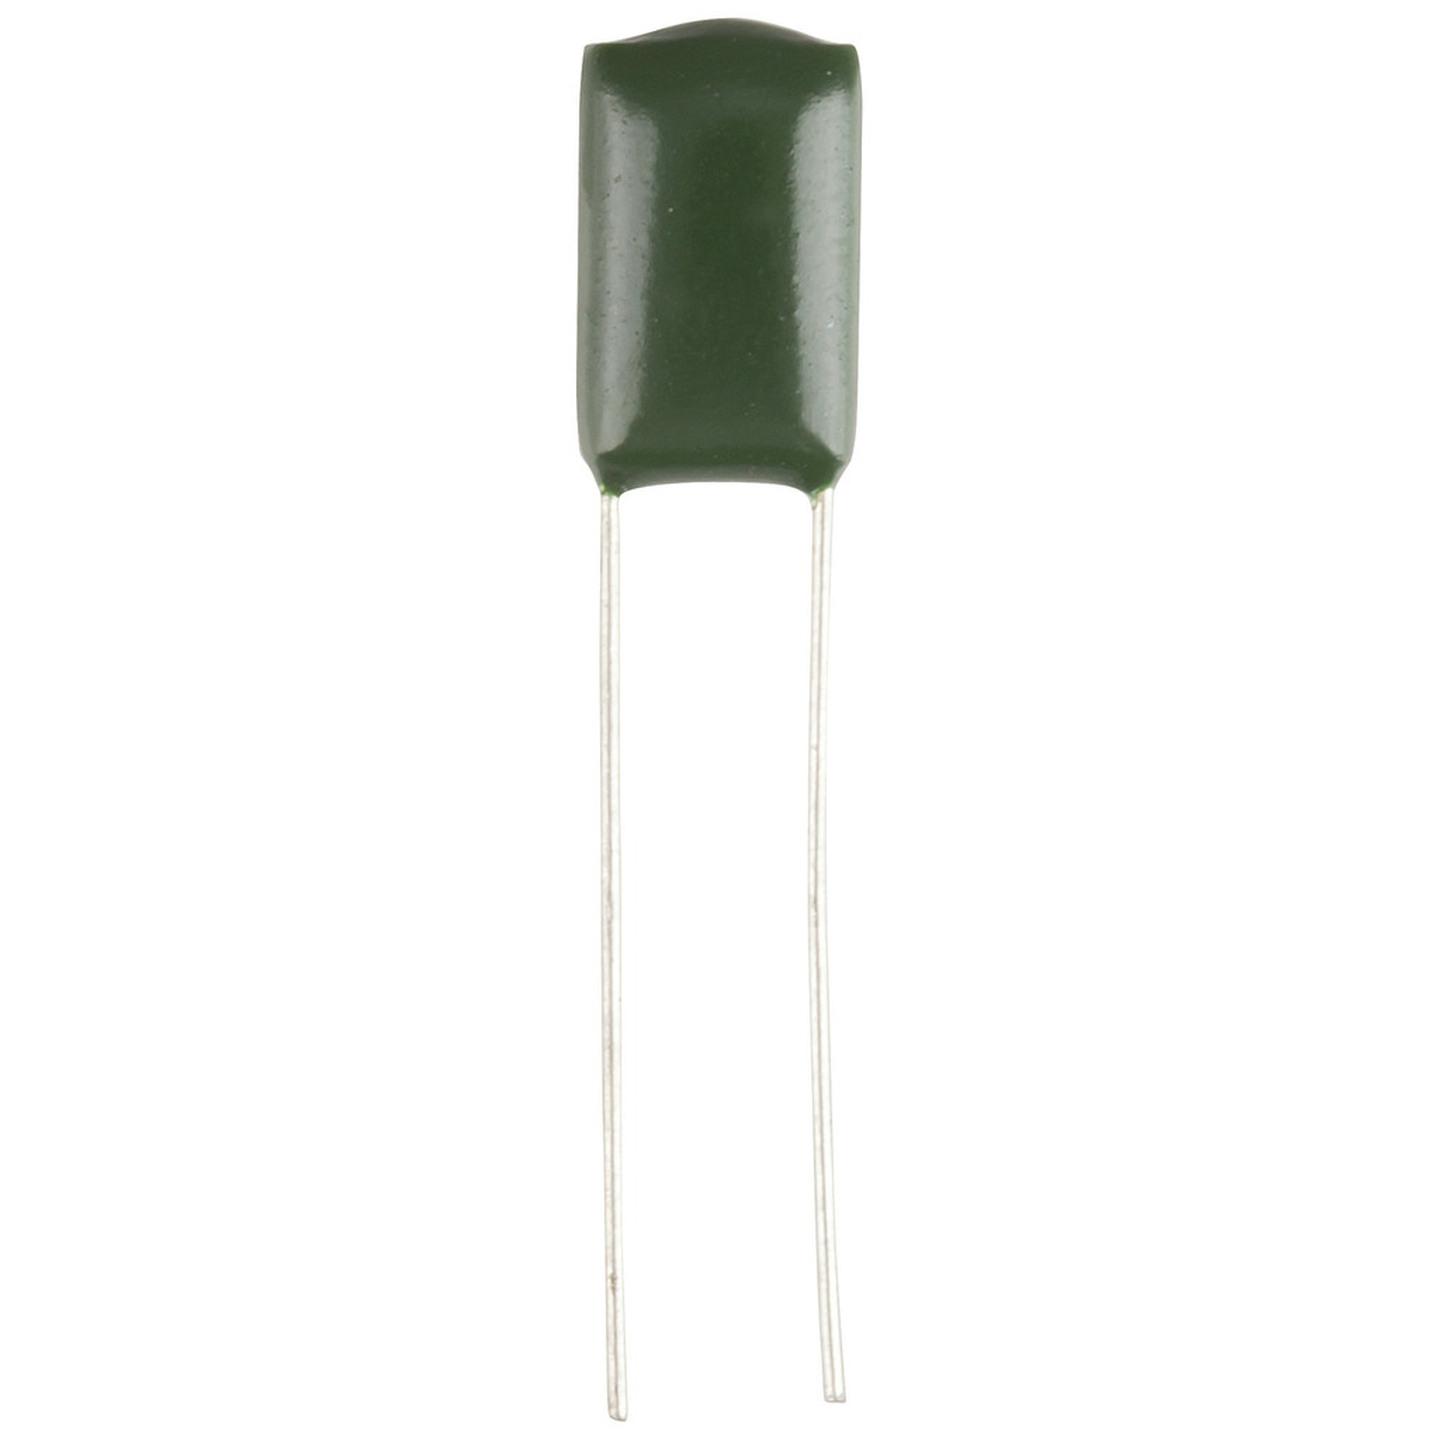 33nF 100VDC Polyester Capacitor